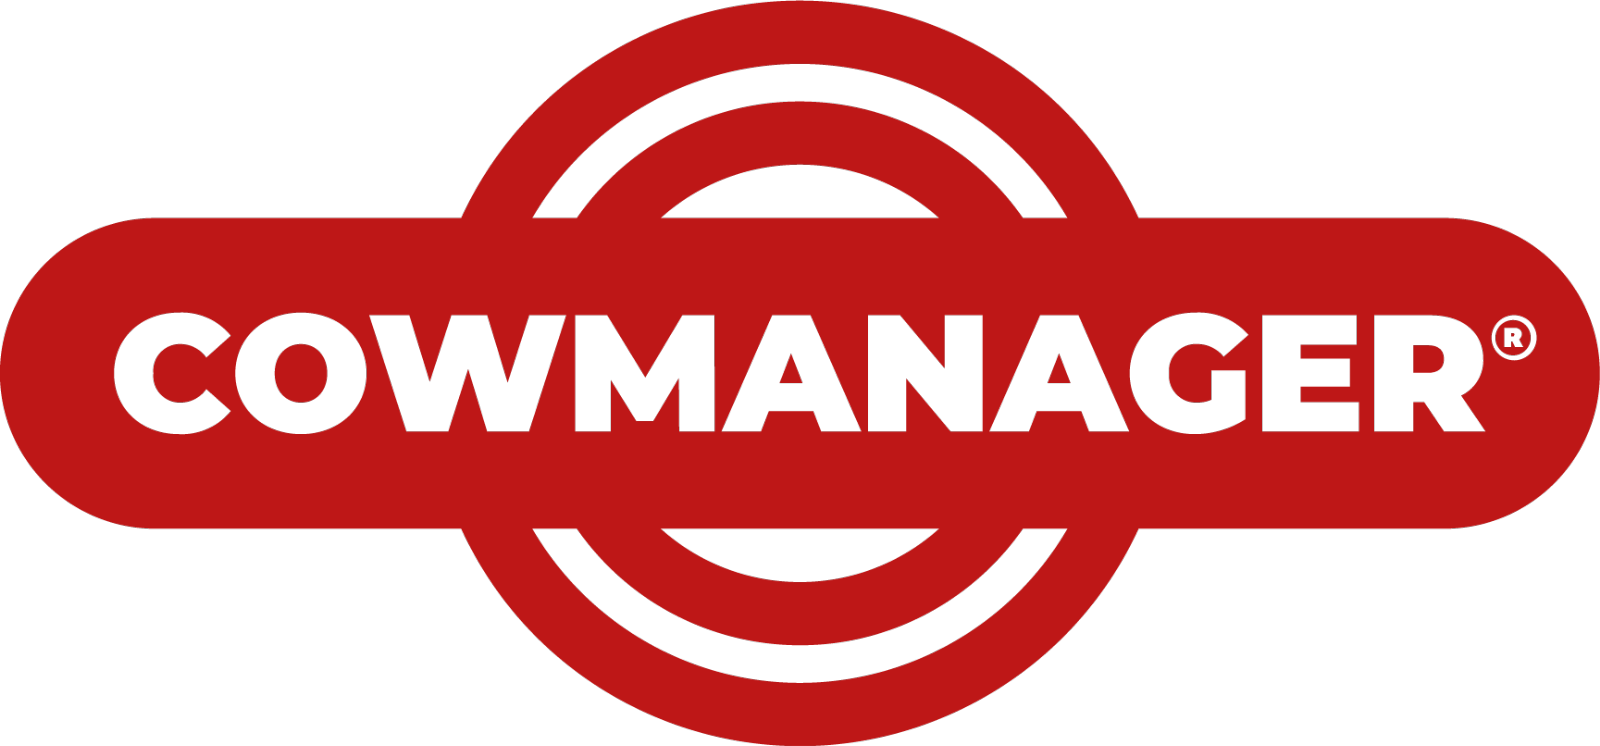 Cowmanager logo